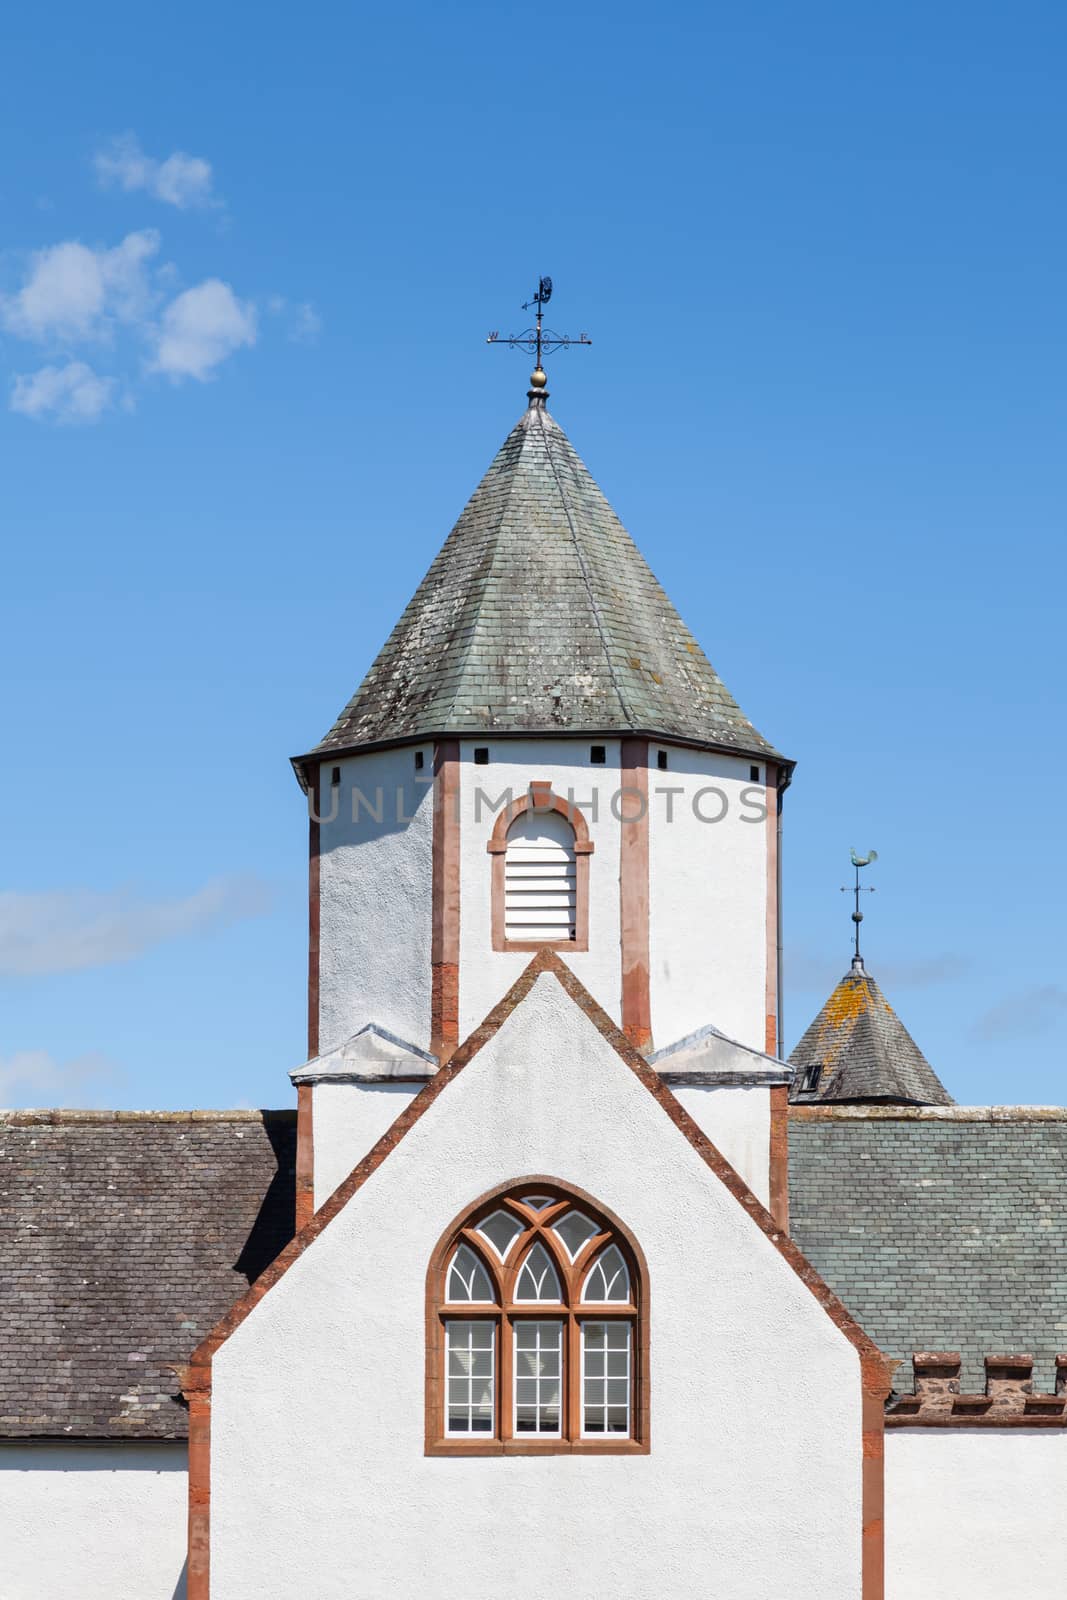 The octagonal central tower of Lauder Old Parish Church is pictured.  The church was built in 1673 and is situated in Lauder, the Scottish Borders.